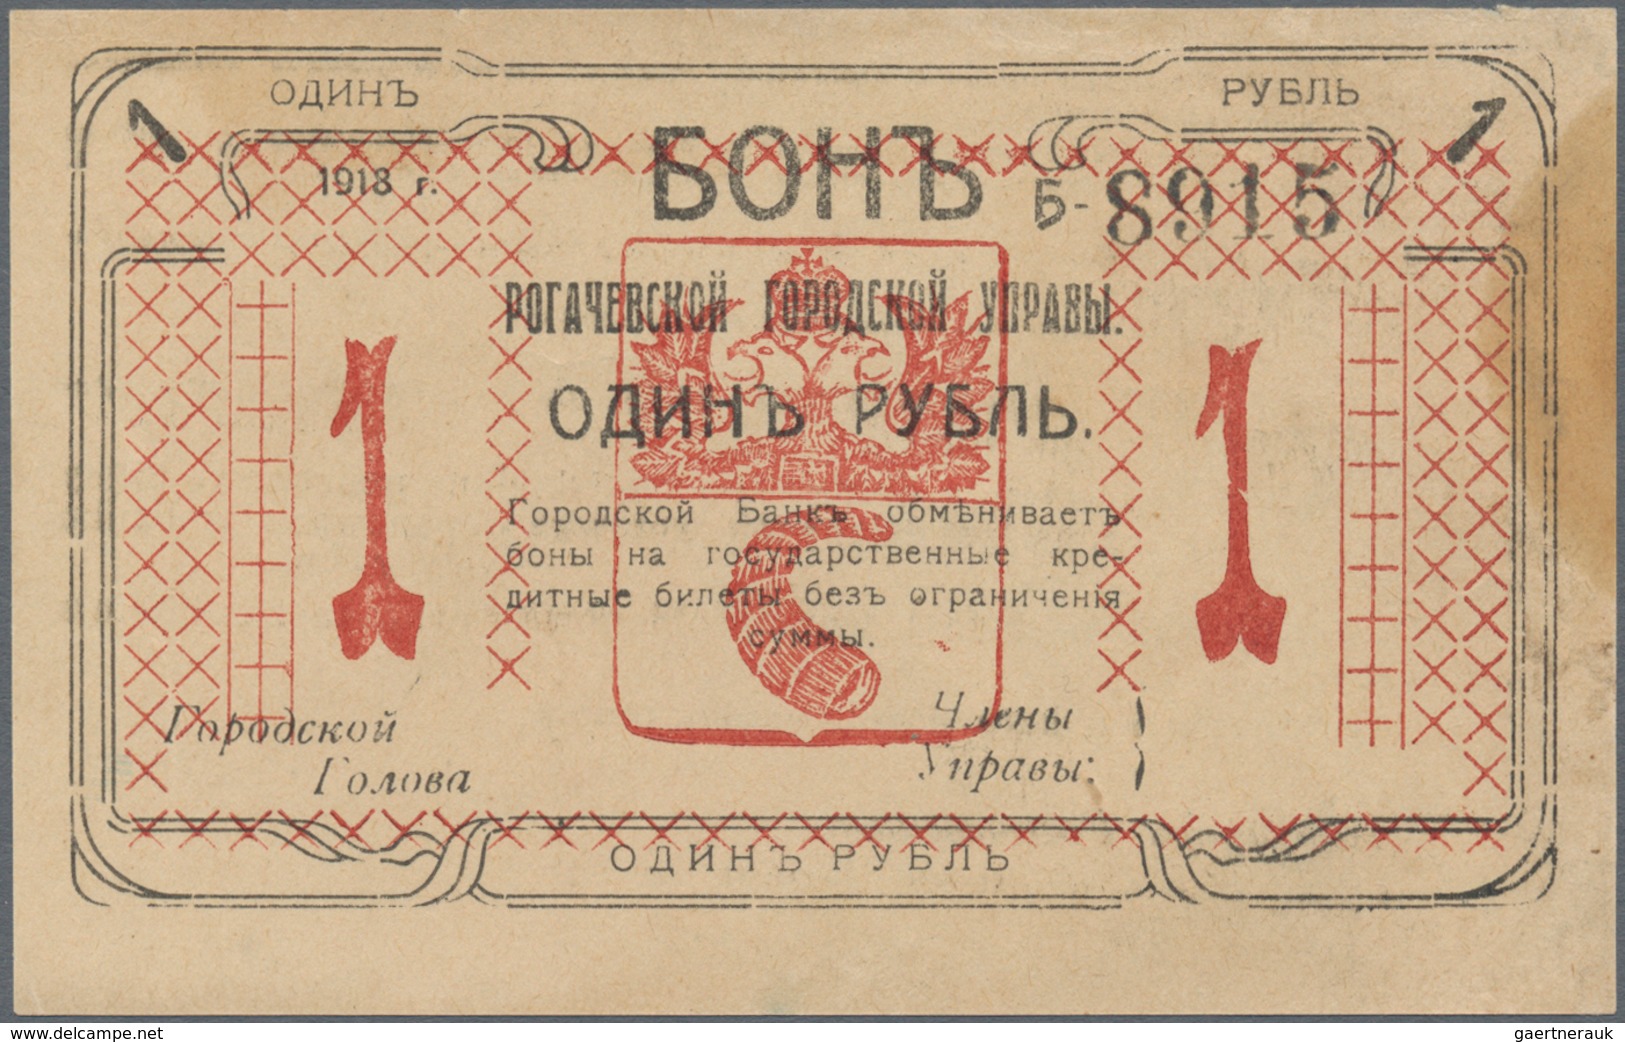 Belarus: City Of Rogachev - Rahachow, 1 Ruble 1918 (Bon), Small Tear At Upper Corner, Stained, P.NL - Wit-Rusland